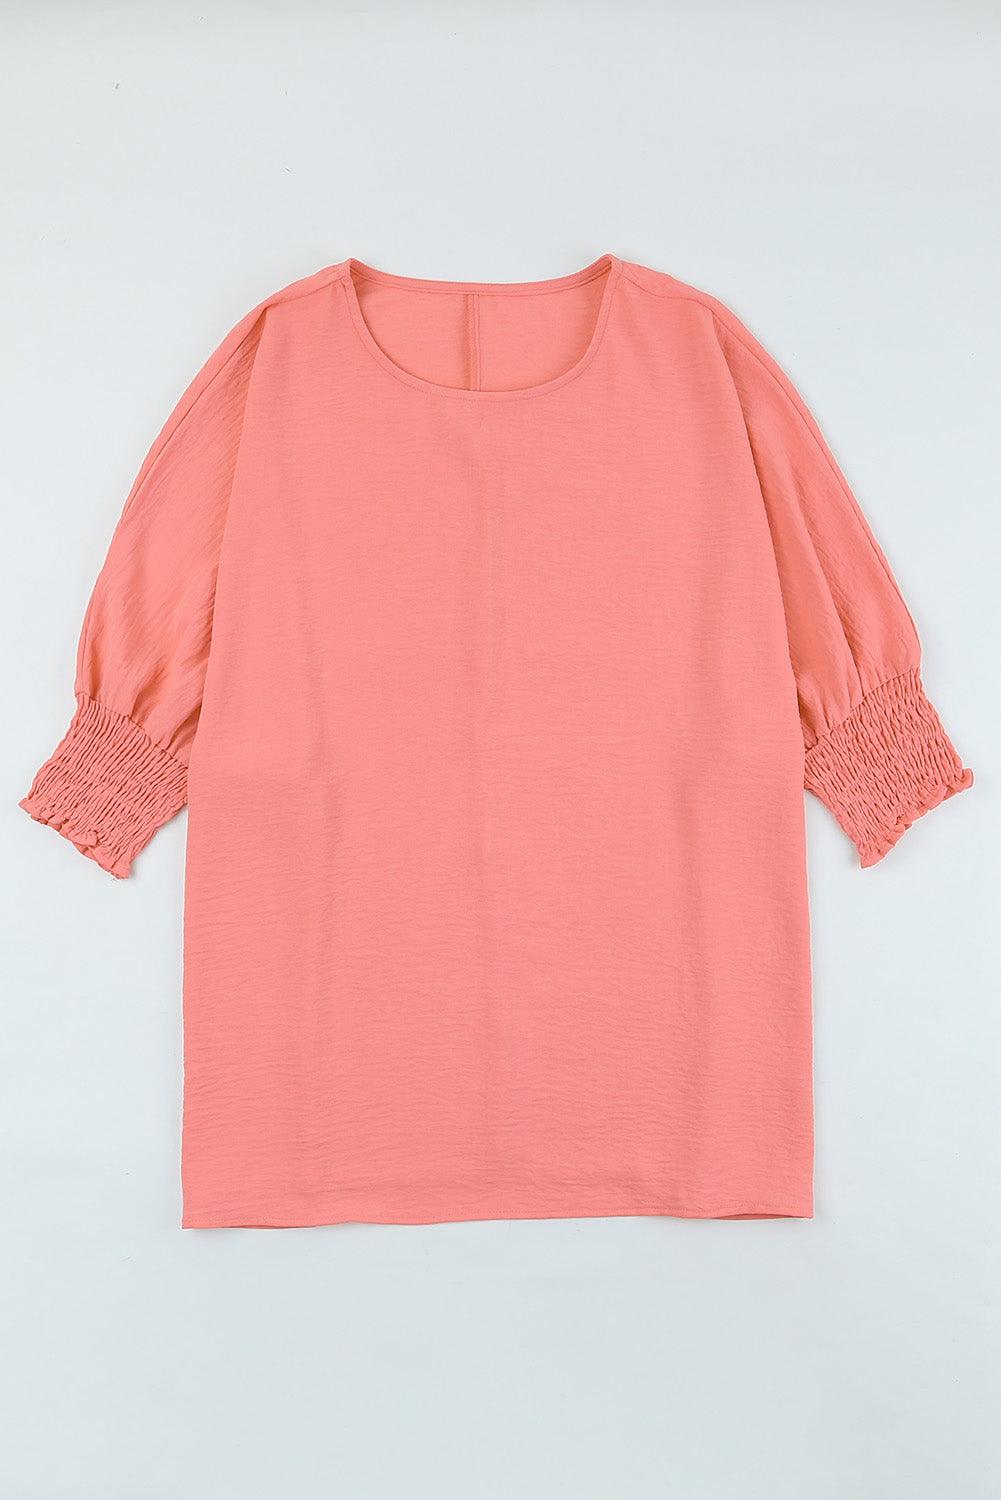 Smocked Wrist Shift Pink Top Blouse for Women